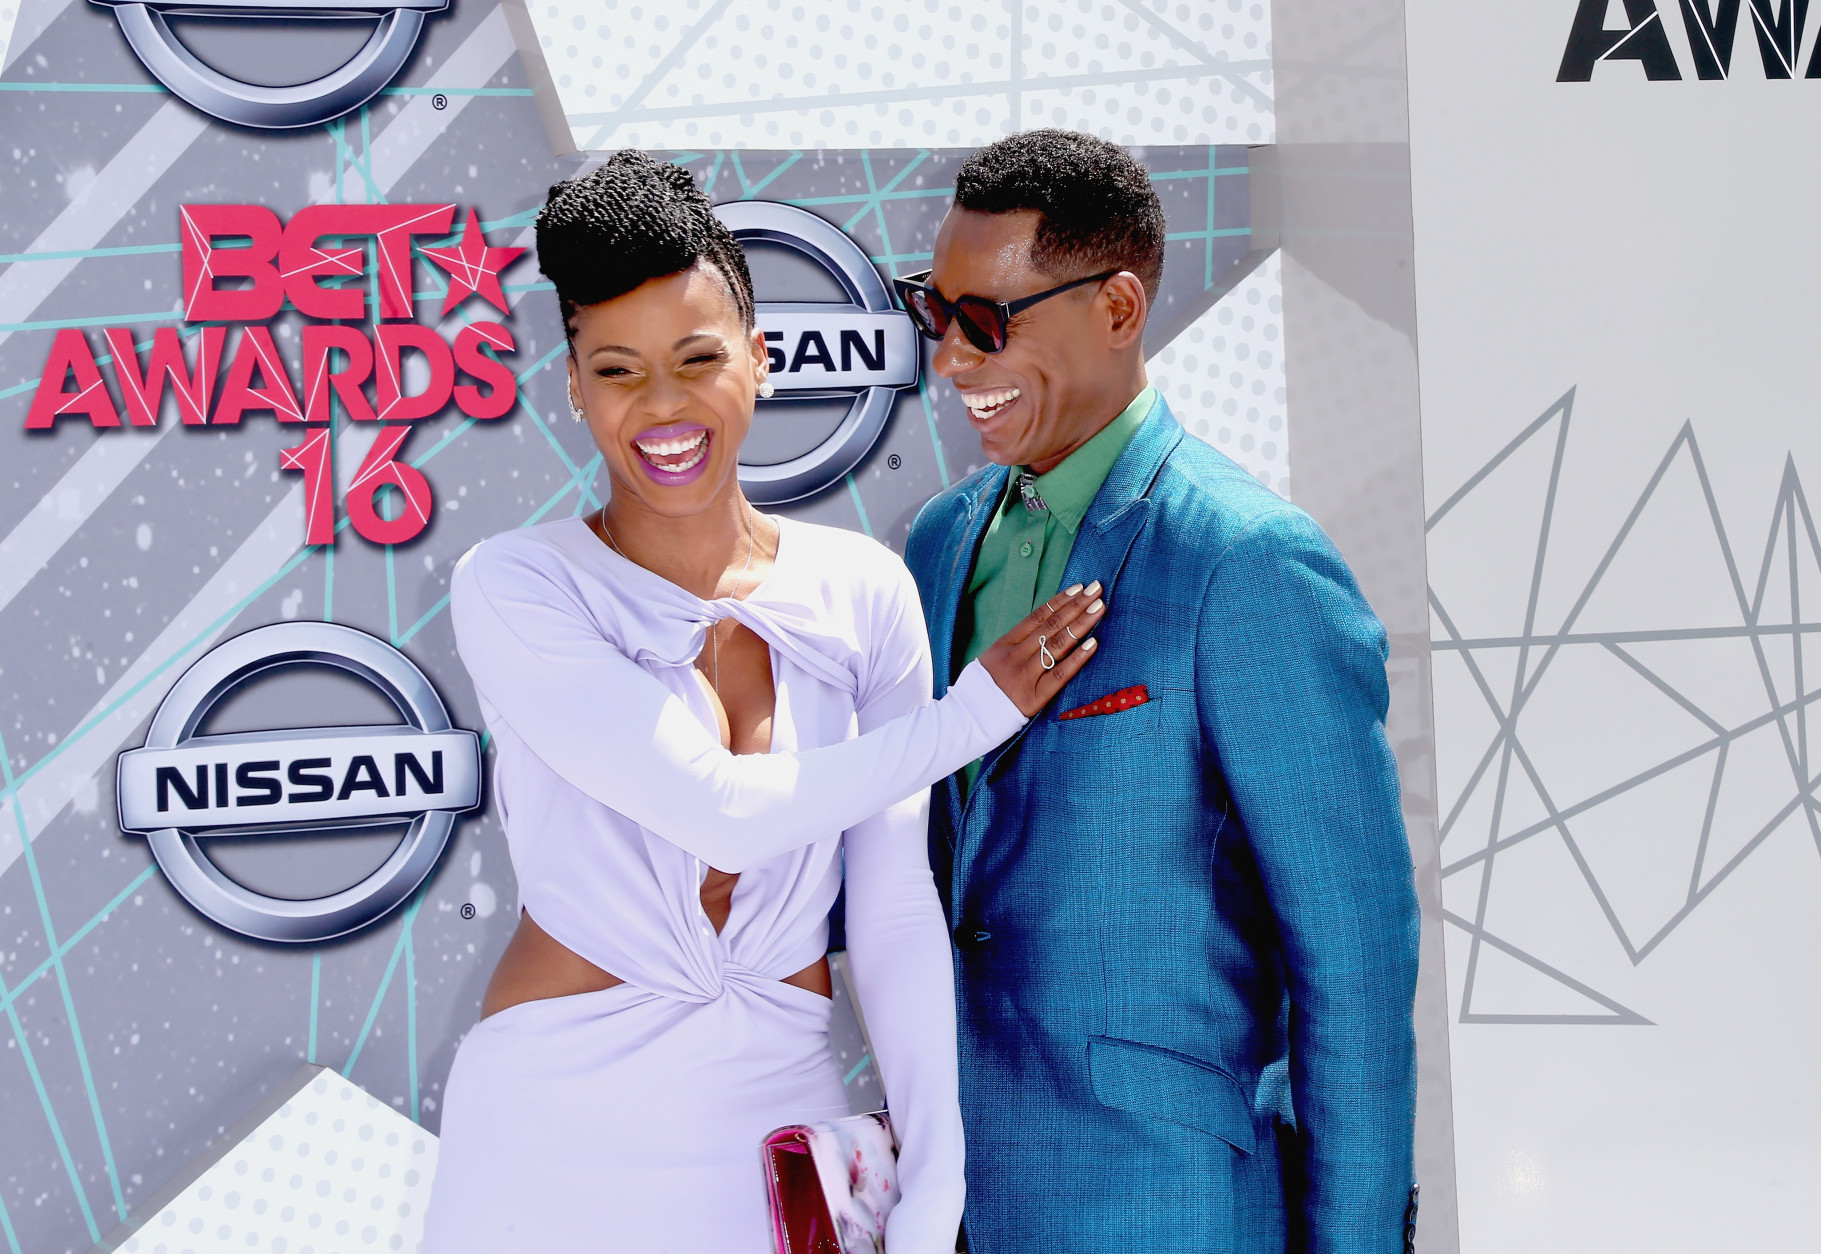 LOS ANGELES, CA - JUNE 26:  Actors Danielle Mone Truitt (L) and Orlando Jones attend the 2016 BET Awards at the Microsoft Theater on June 26, 2016 in Los Angeles, California.  (Photo by Frederick M. Brown/Getty Images)